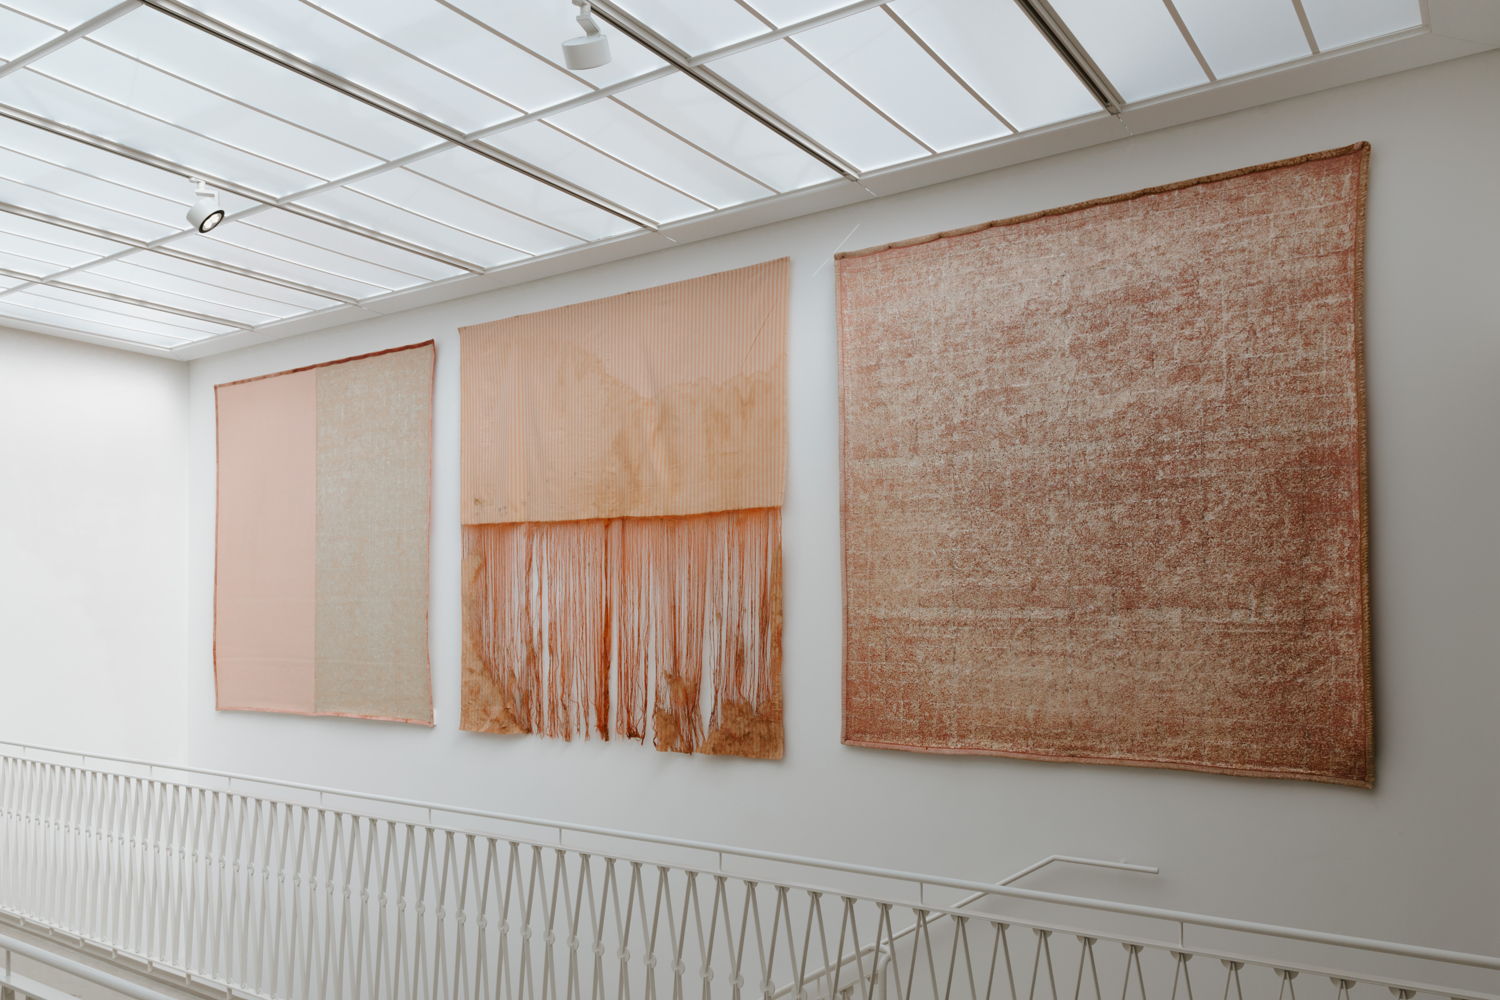  Installation view of Leaps of Faith at Z33, Hasselt. From left to right: Edith Dekyndt, White Gold on Pink Blanket, Underground “Bas du Roé”, Silver Leaves on Pink Blanket, 2019. Courtesy of the artist and Galerie Greta Meert. Photo: Selma Gurbuz.